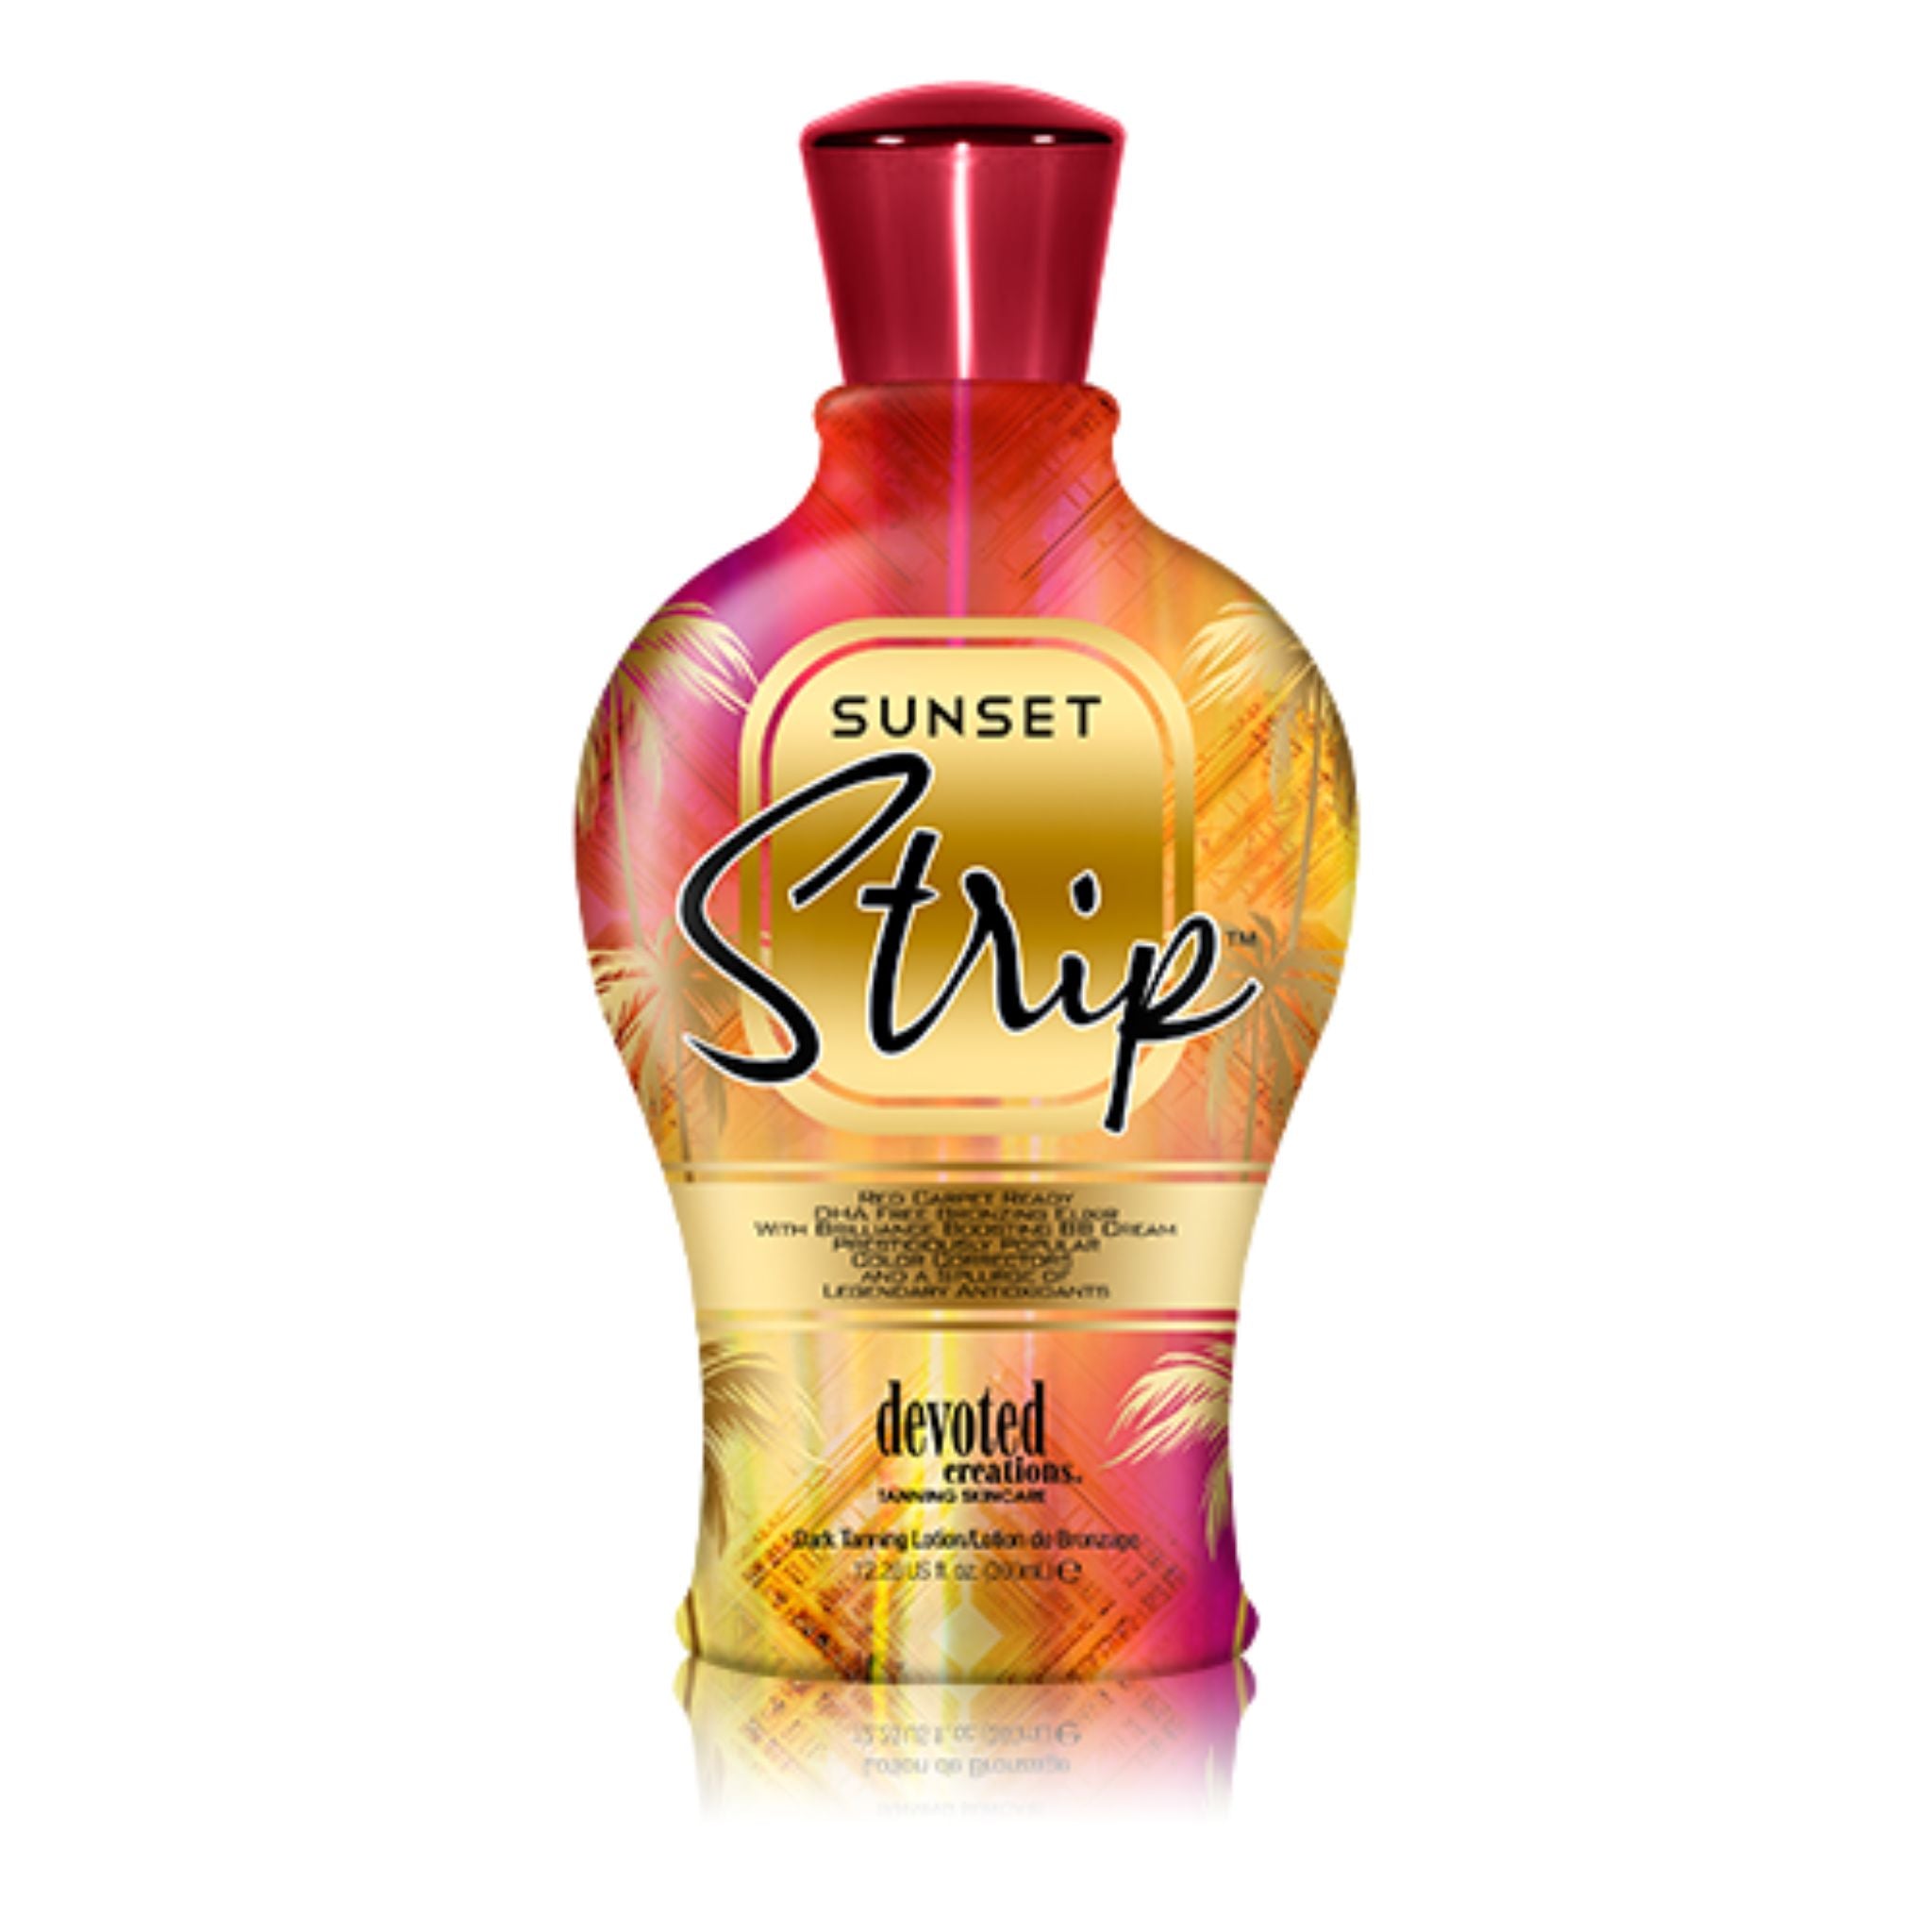 Devoted Creations Sunset Strip Tanning Lotion Tanning Lotion